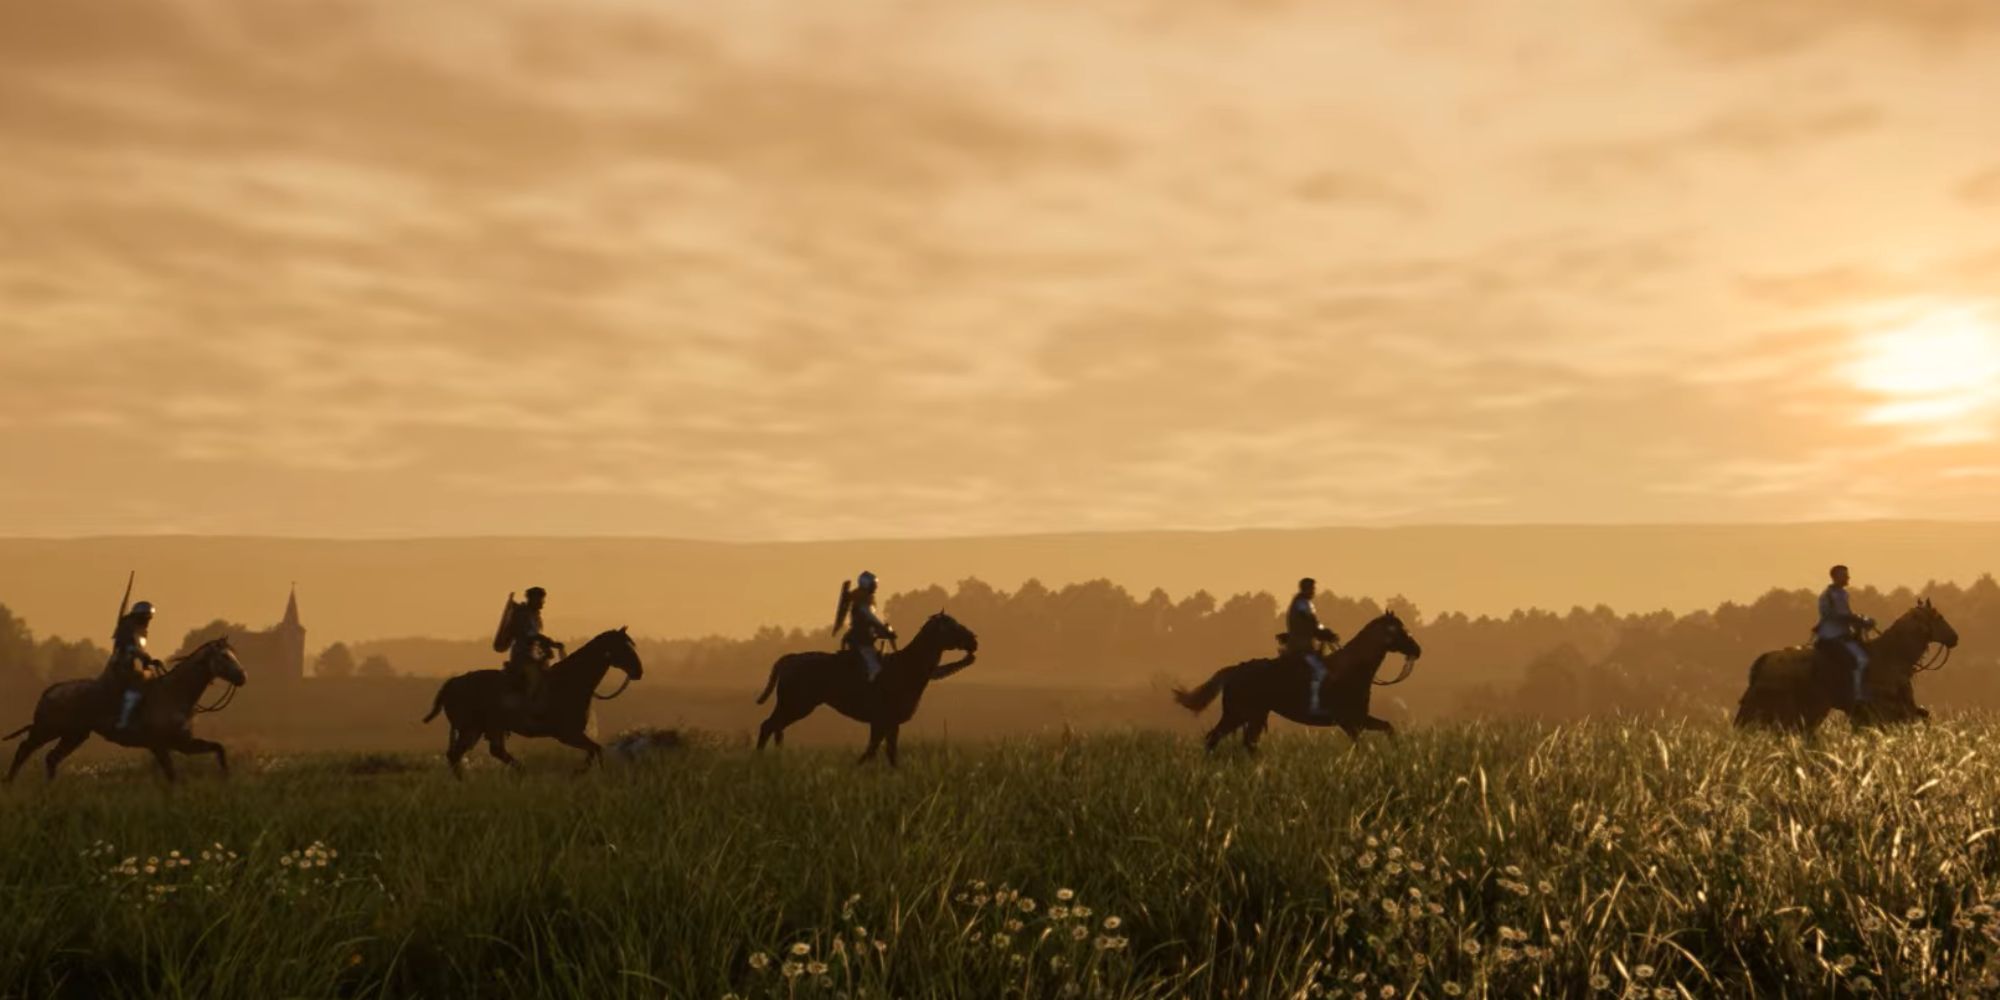 Things We Learned From The Kingdom Come Deliverance 2 Trailer, Knights on Horseback